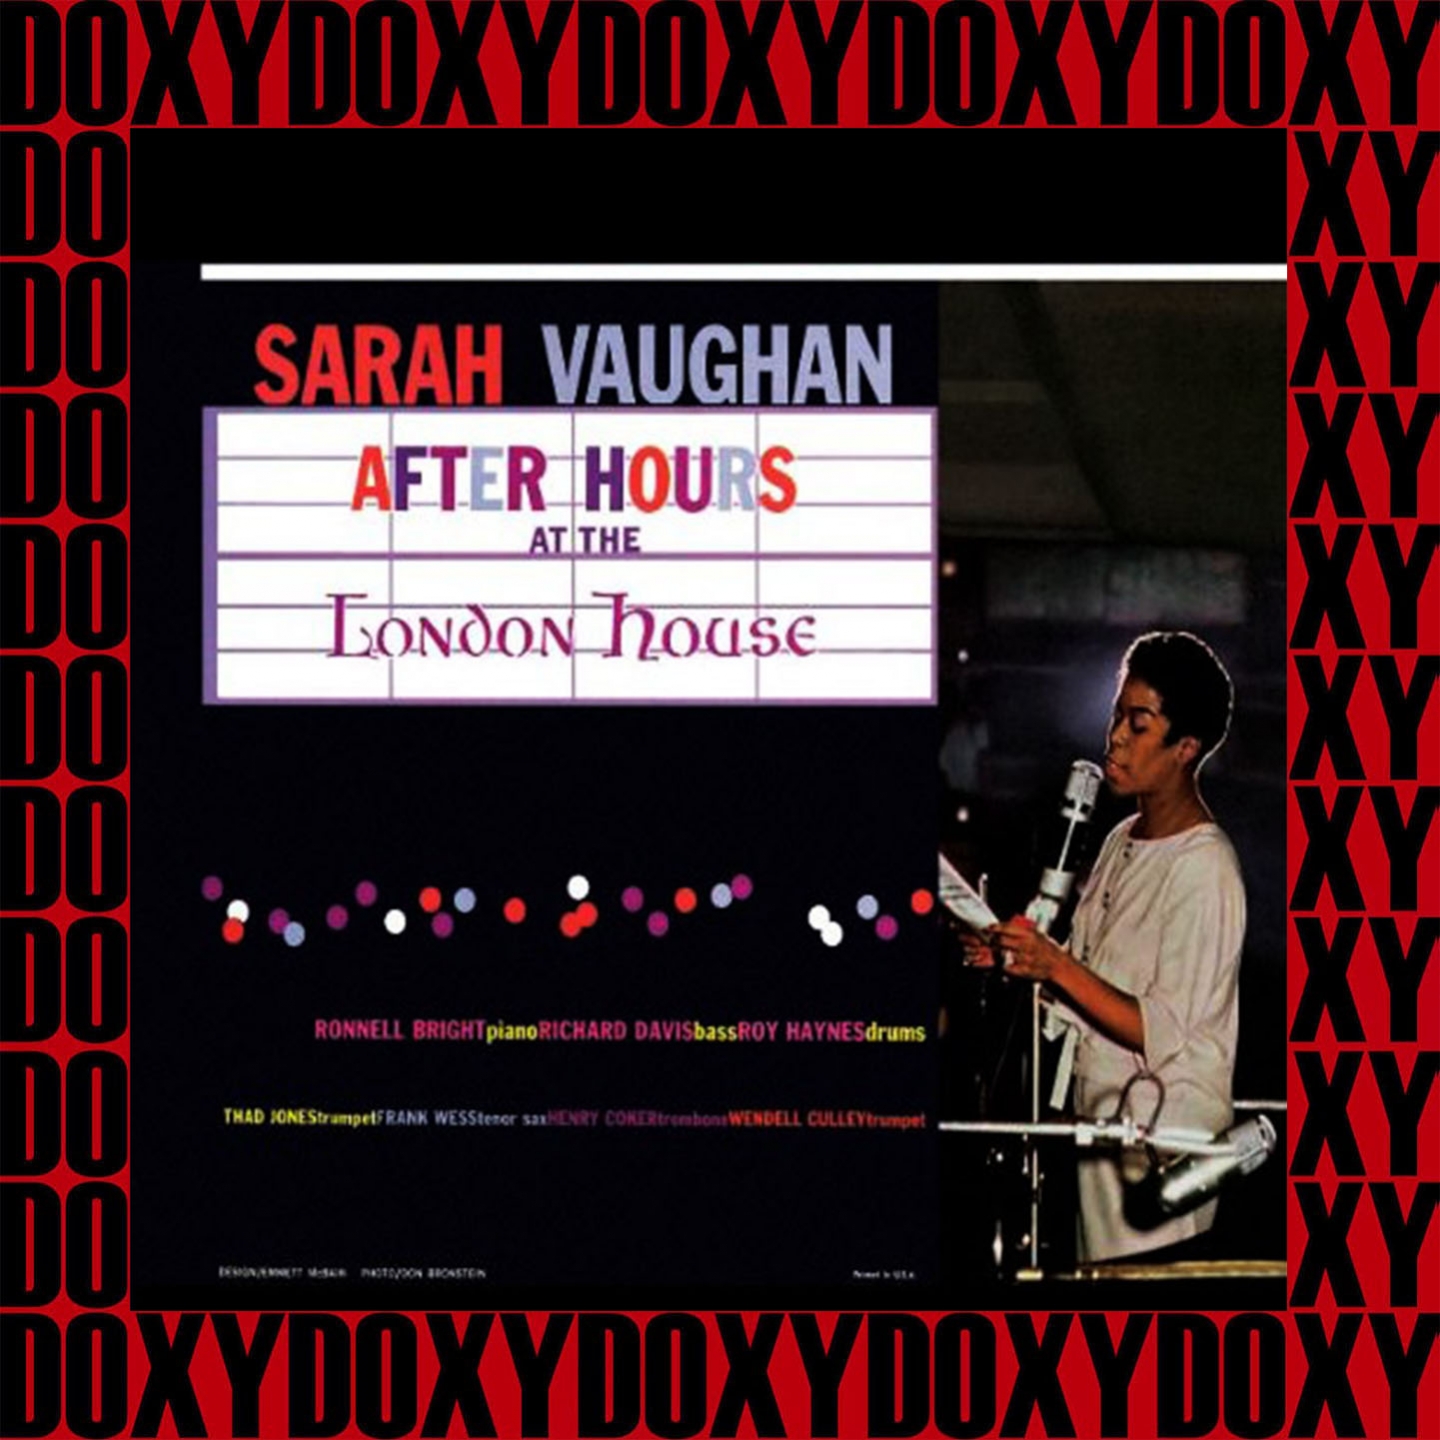 After Hours Live At The London House (Remastered Version) (Doxy Collection)